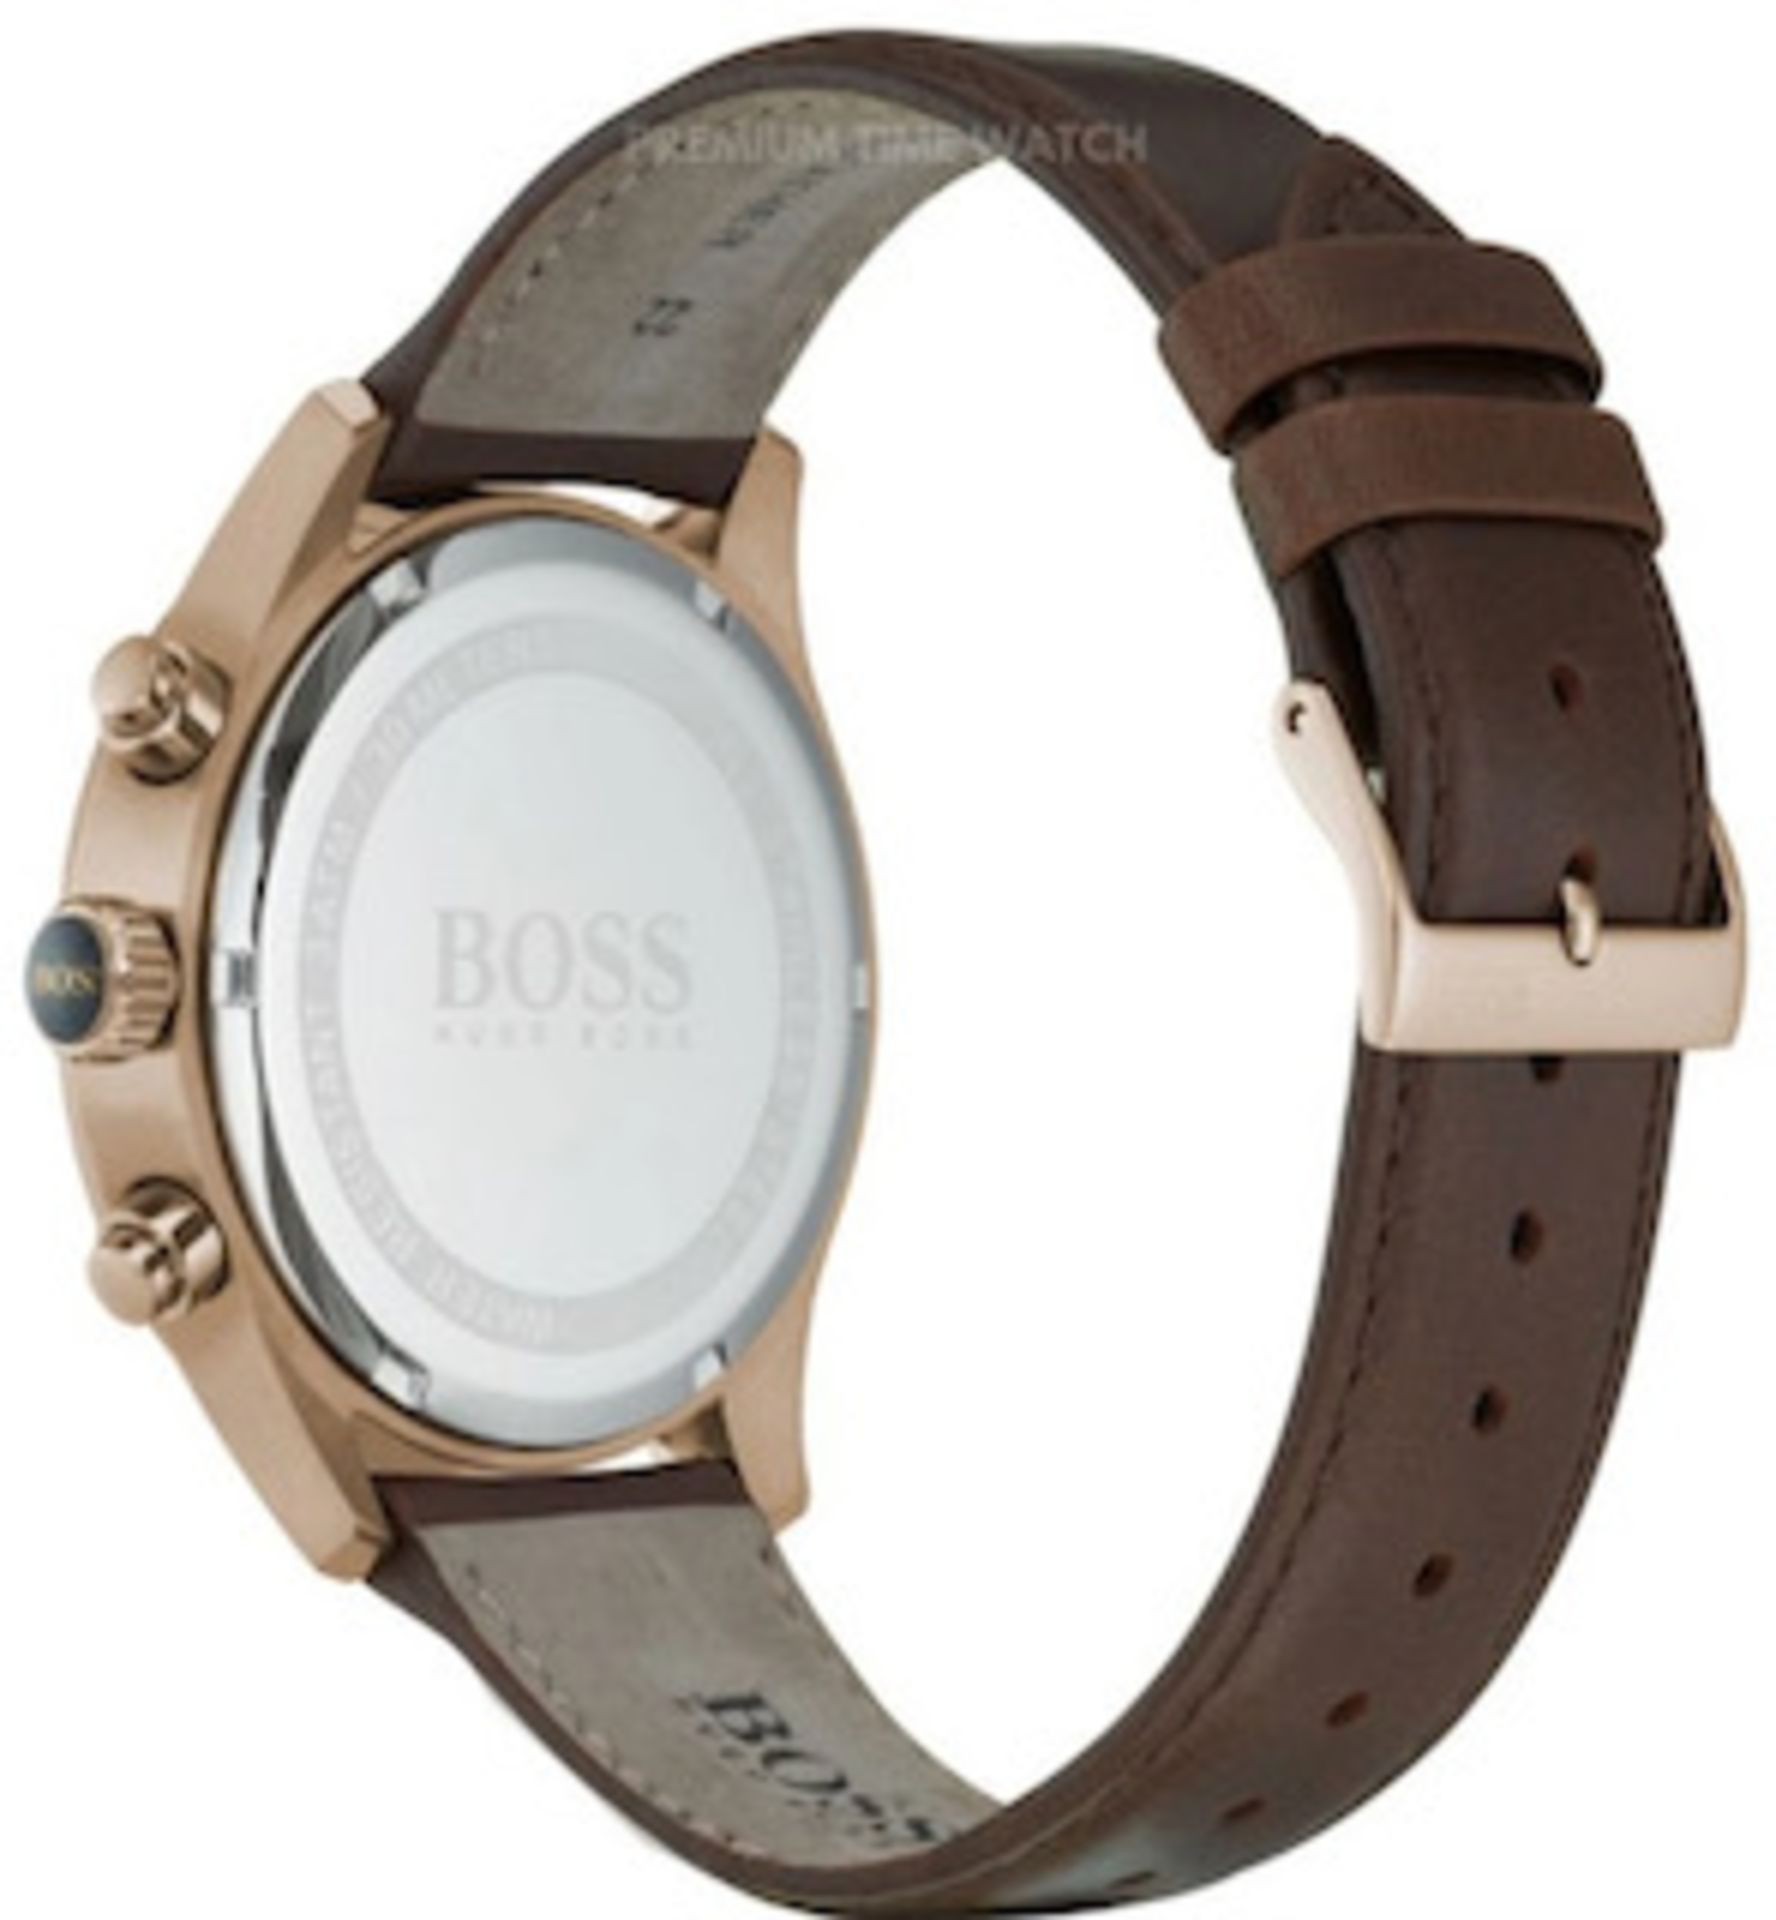 Hugo Boss 1513604 Men's Grand Prix Blue Dial Brown Leather Strap Chronograph Watch - Image 3 of 5